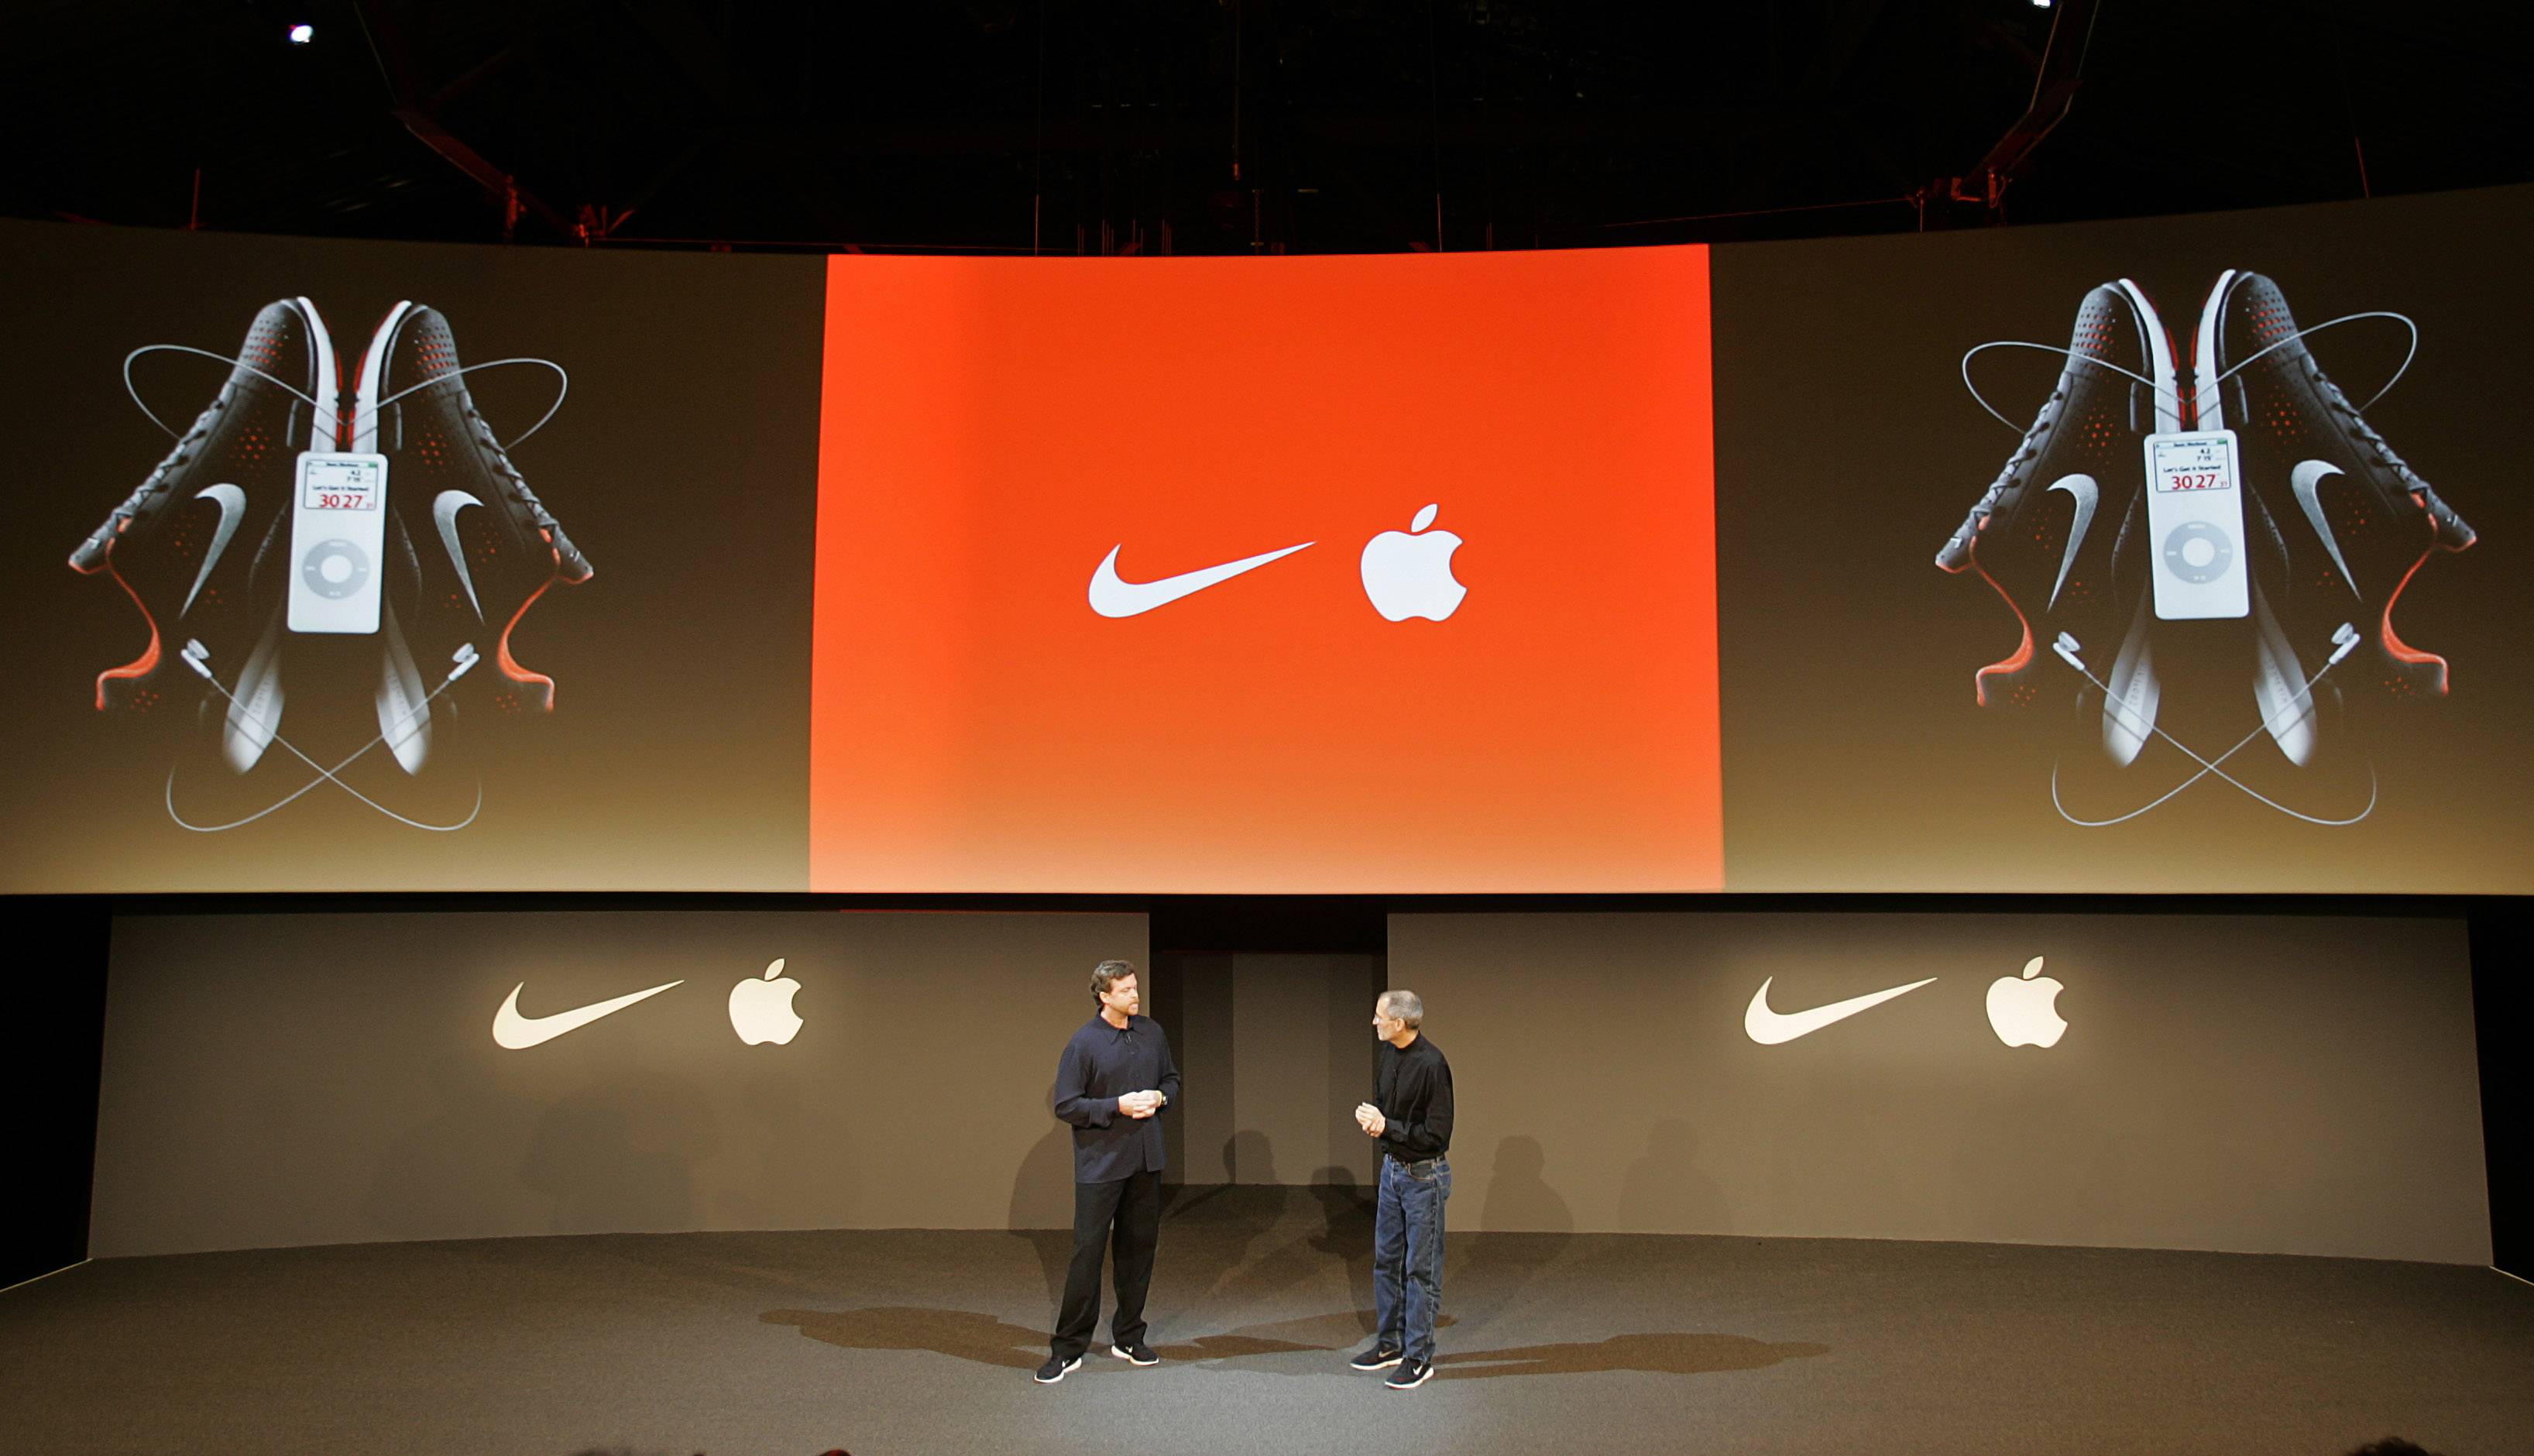 Nike and Apple Announce the Launch of the Nike+iPod - May 23, 2006